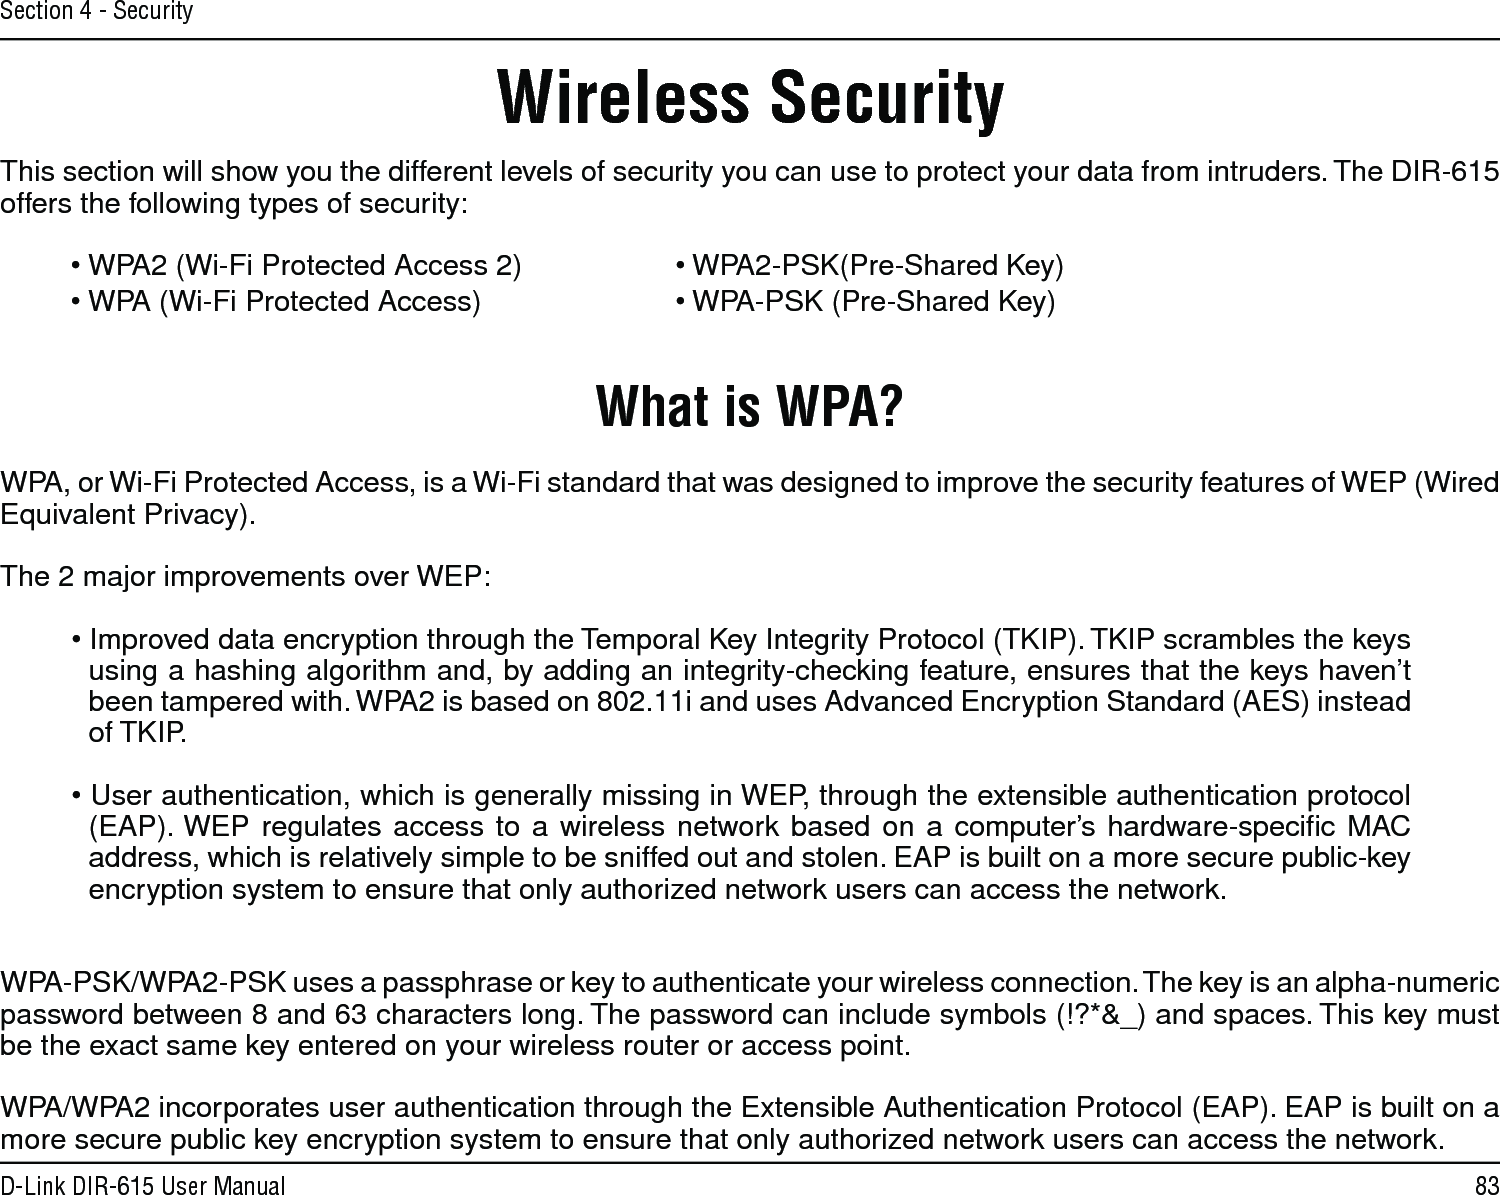 83D-Link DIR-615 User ManualSection 4 - SecurityWireless SecurityThis section will show you the different levels of security you can use to protect your data from intruders. The DIR-615 offers the following types of security:• WPA2 (Wi-Fi Protected Access 2)     • WPA2-PSK(Pre-Shared Key)• WPA (Wi-Fi Protected Access)      • WPA-PSK (Pre-Shared Key)What is WPA?WPA, or Wi-Fi Protected Access, is a Wi-Fi standard that was designed to improve the security features of WEP (Wired Equivalent Privacy).  The 2 major improvements over WEP: • Improved data encryption through the Temporal Key Integrity Protocol (TKIP). TKIP scrambles the keys using a hashing algorithm and, by adding an integrity-checking feature, ensures that the keys haven’t been tampered with. WPA2 is based on 802.11i and uses Advanced Encryption Standard (AES) instead of TKIP.• User authentication, which is generally missing in WEP, through the extensible authentication protocol (EAP). WEP regulates access to a wireless network based on a computer’s hardware-speciﬁc MAC address, which is relatively simple to be sniffed out and stolen. EAP is built on a more secure public-key encryption system to ensure that only authorized network users can access the network.WPA-PSK/WPA2-PSK uses a passphrase or key to authenticate your wireless connection. The key is an alpha-numeric password between 8 and 63 characters long. The password can include symbols (!?*&amp;_) and spaces. This key must be the exact same key entered on your wireless router or access point.WPA/WPA2 incorporates user authentication through the Extensible Authentication Protocol (EAP). EAP is built on a more secure public key encryption system to ensure that only authorized network users can access the network.